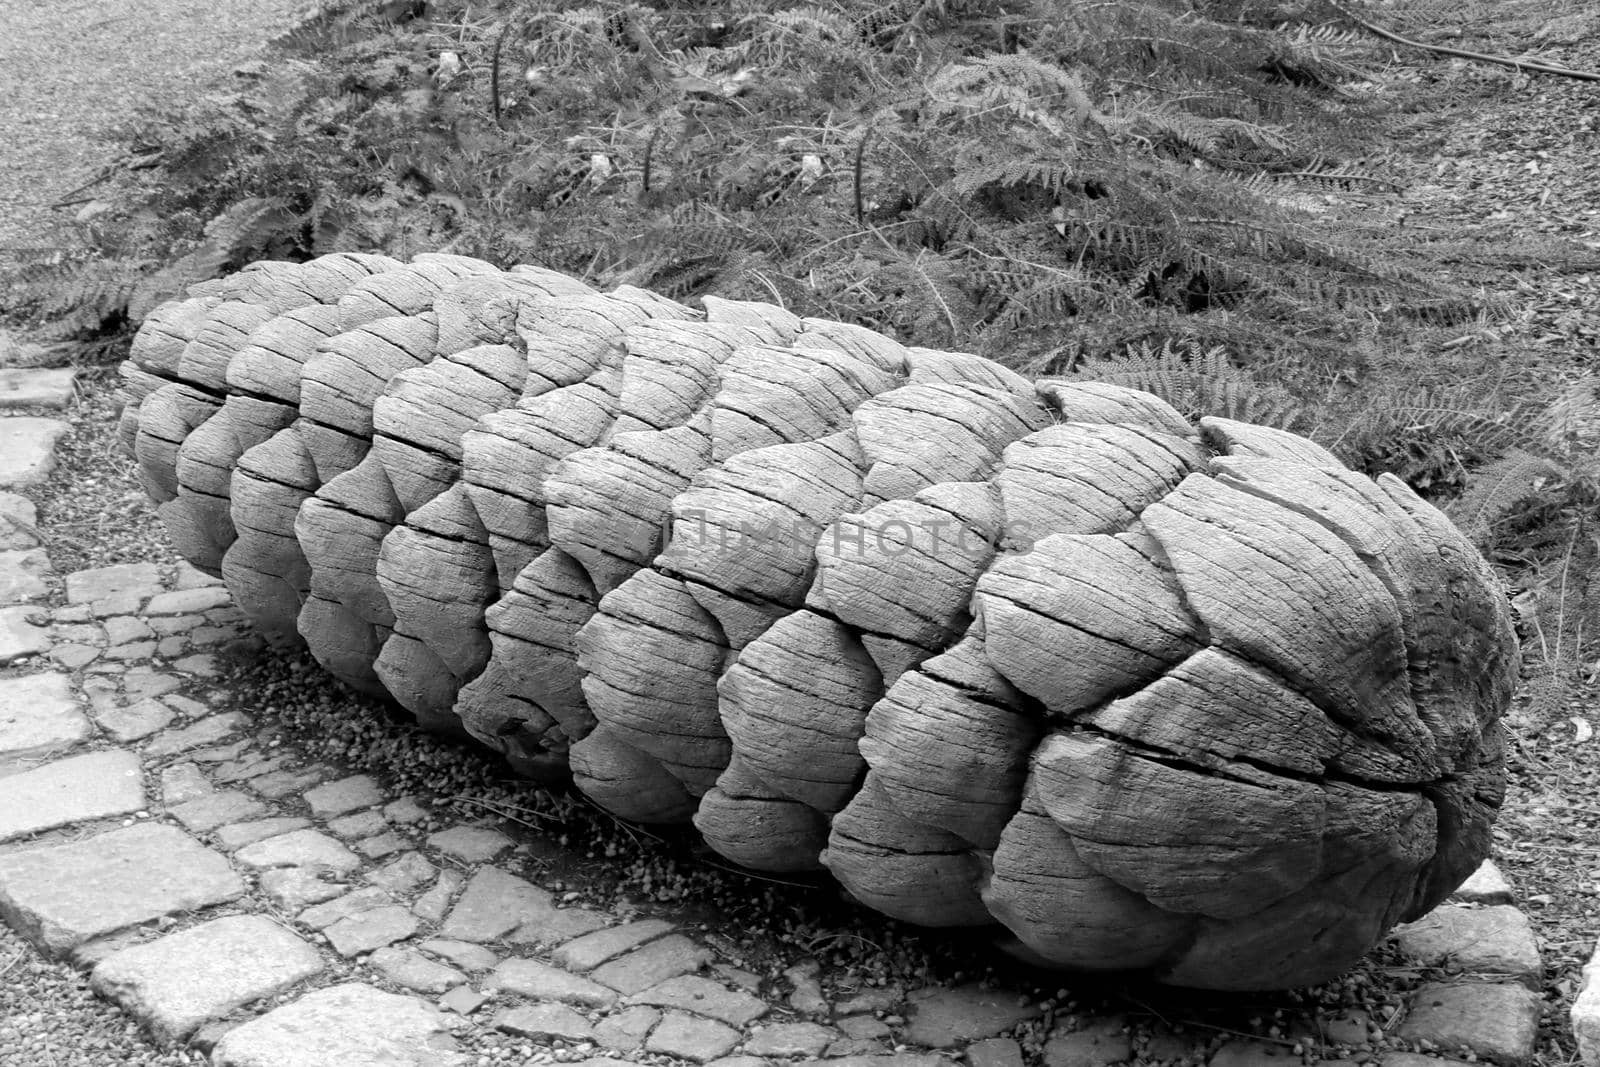 Black and white photo, a large cone of wood